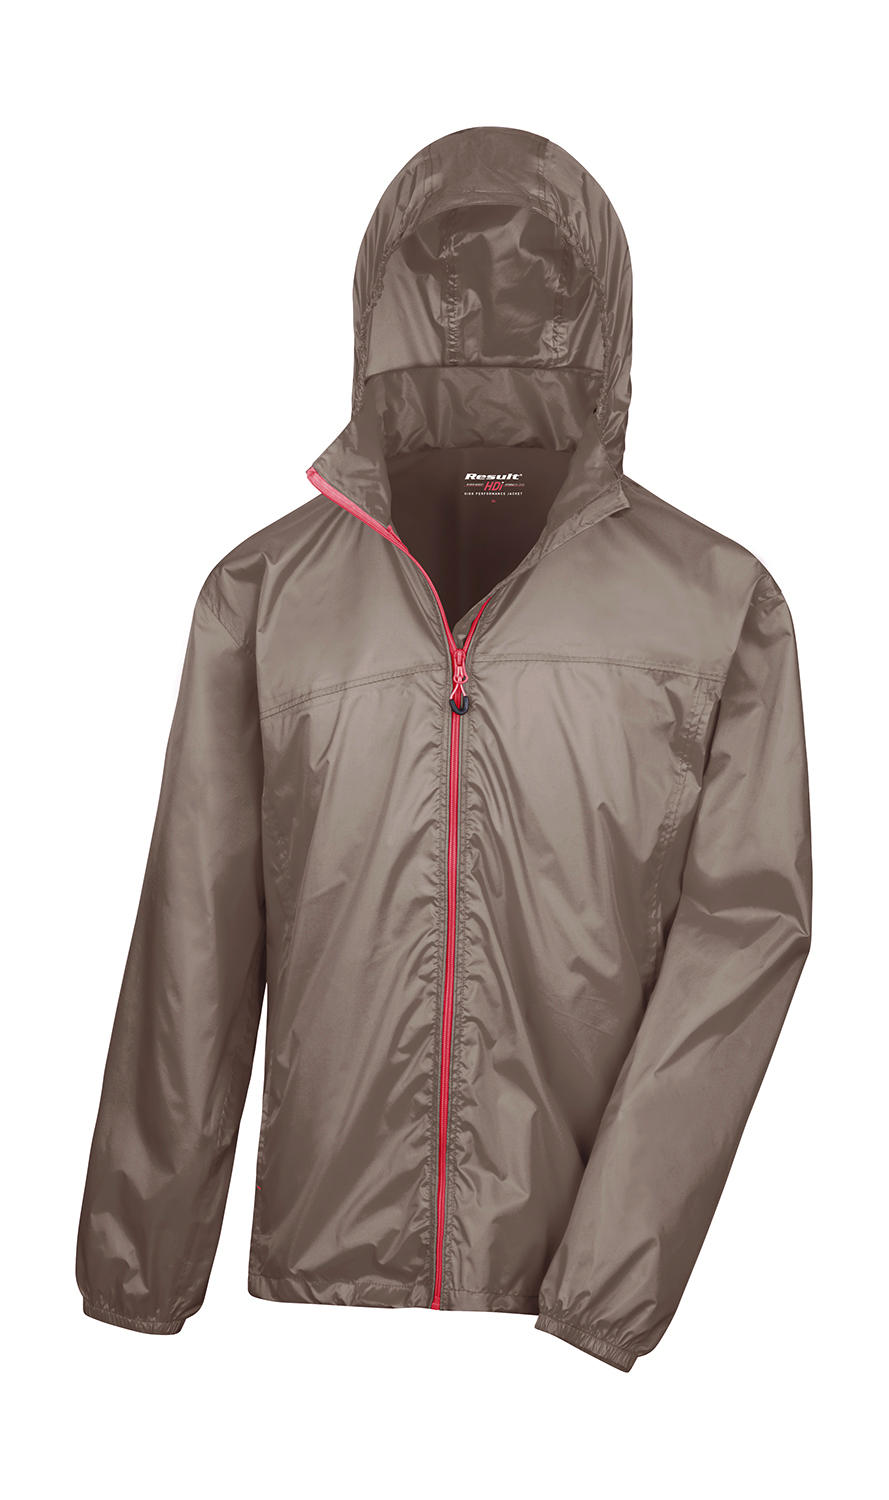  HDI Quest Lightweight Stowable Jacket in Farbe Fennel/Pink